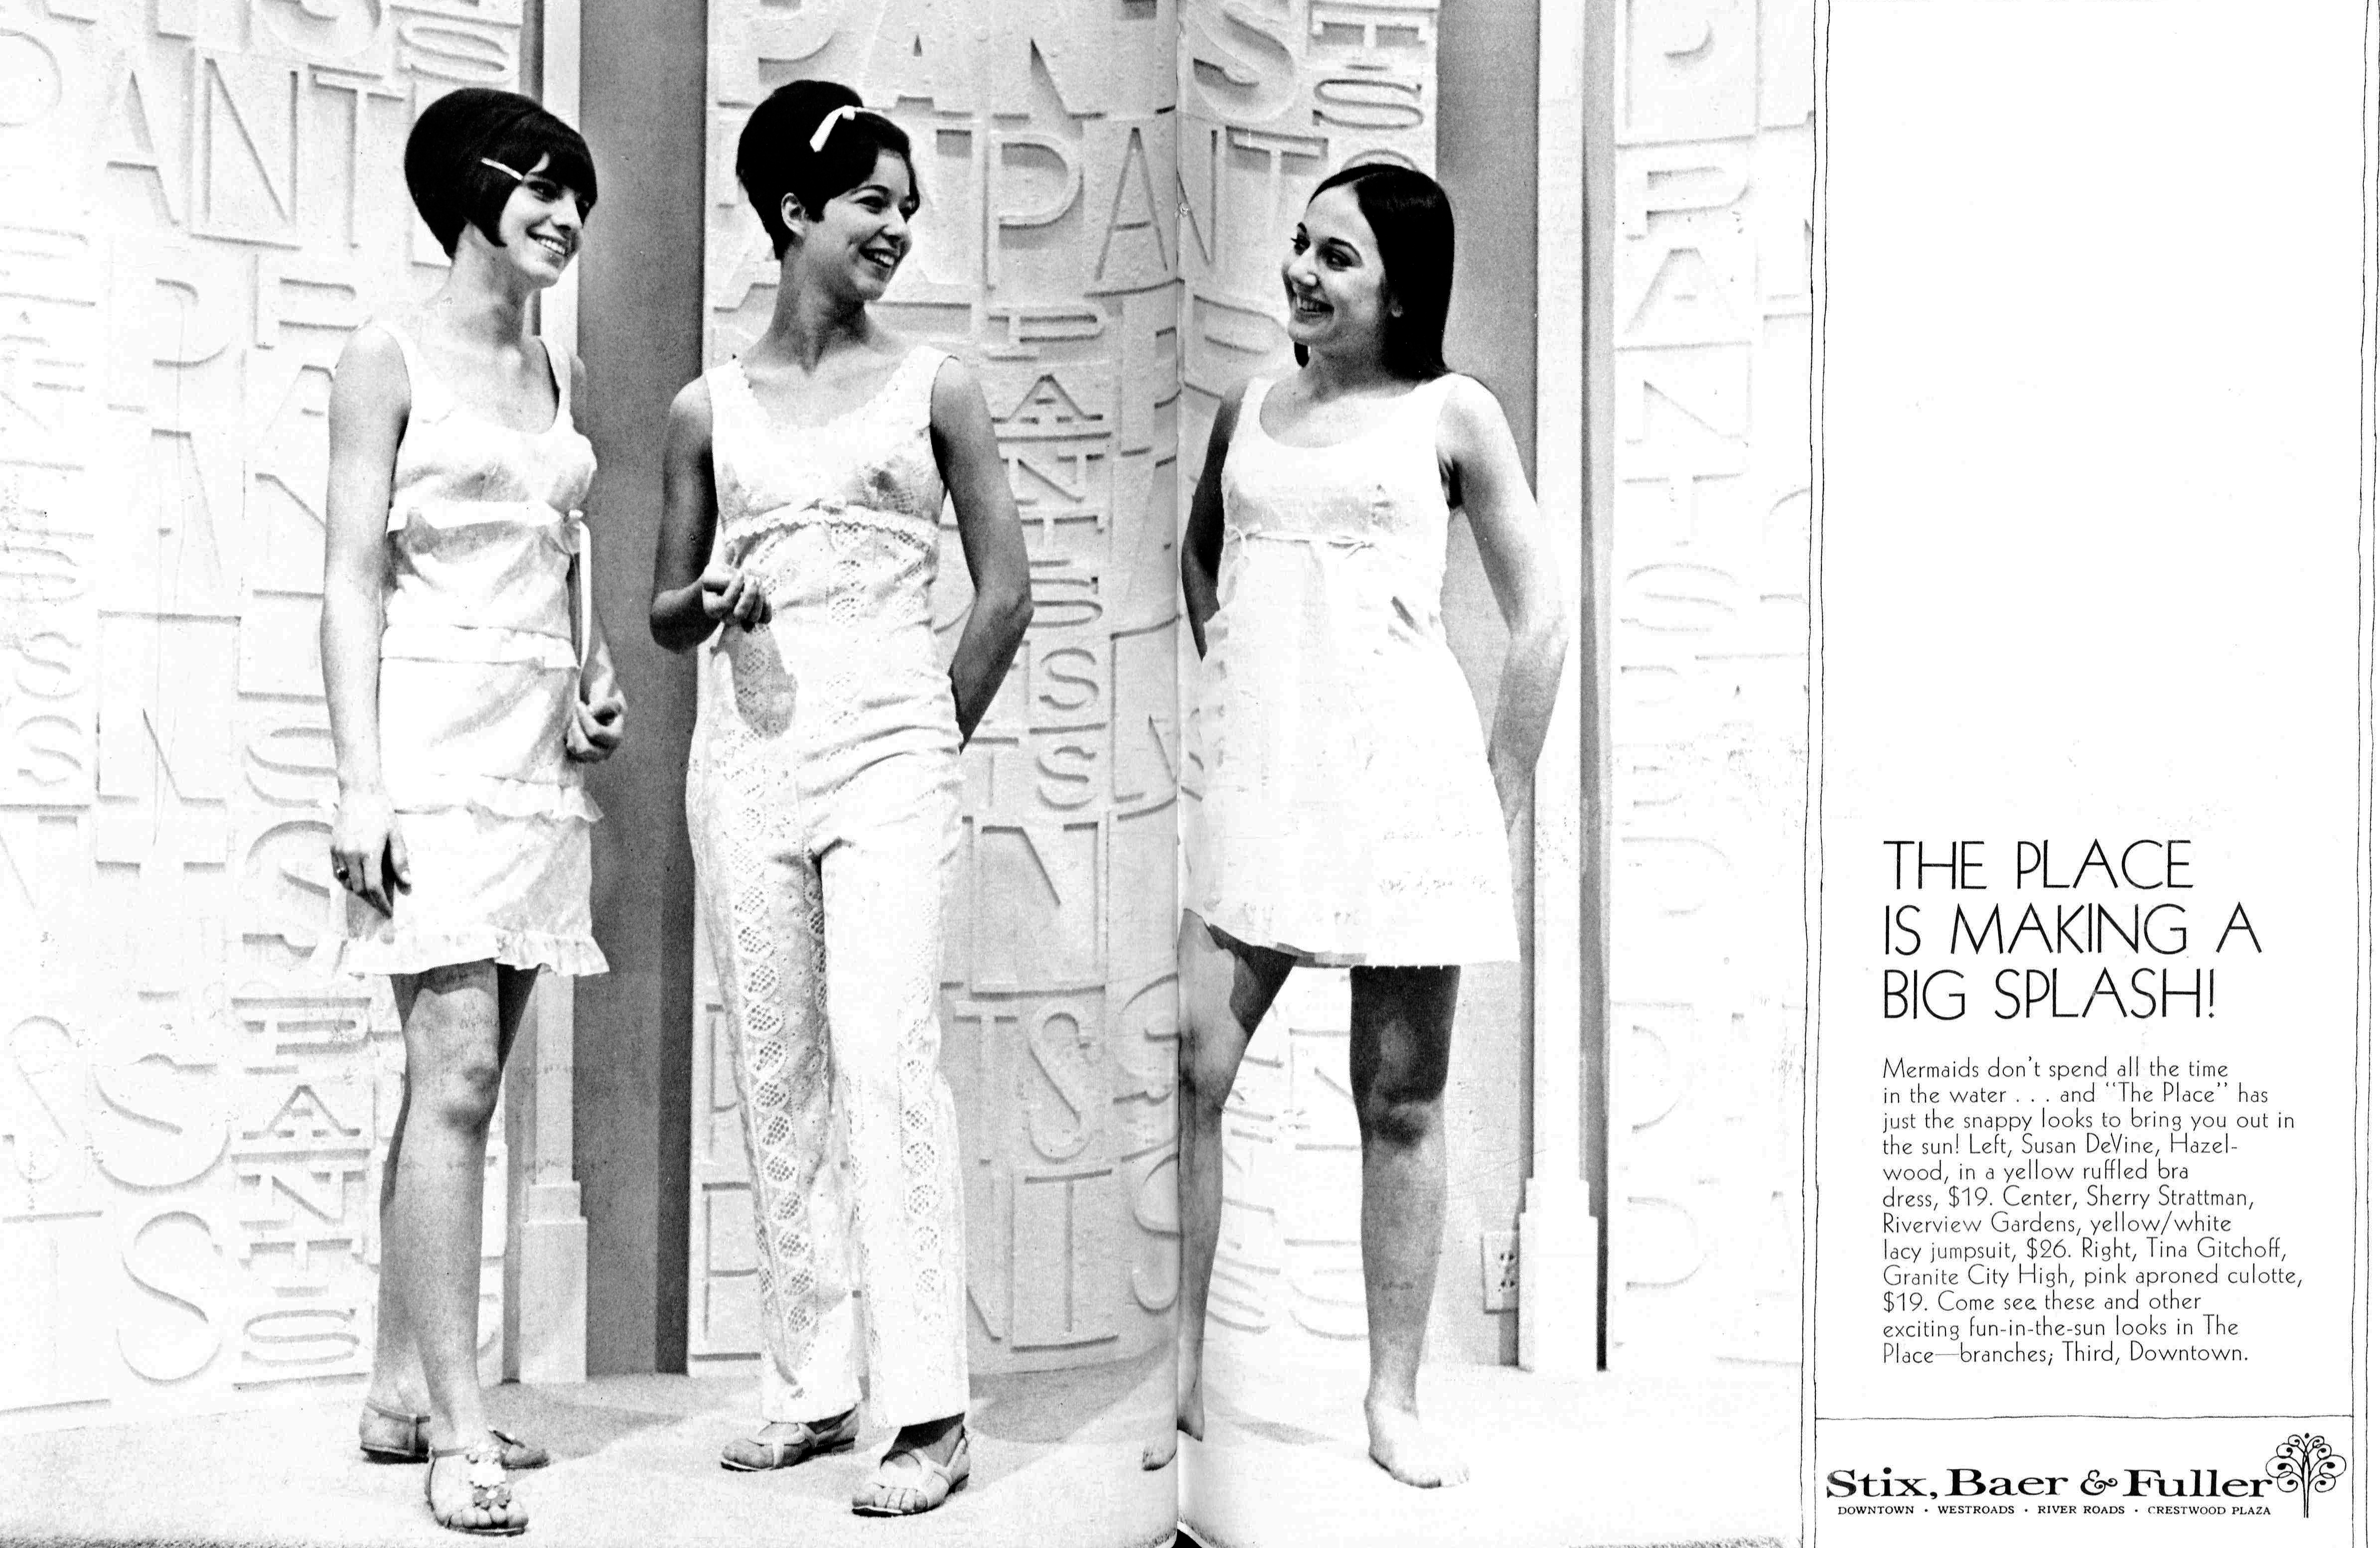 RGHS SENIOR Sherry Strattman is featured in a Stix, Baer & Fuller ad in PROM MAGAZINE APRIL 1969.